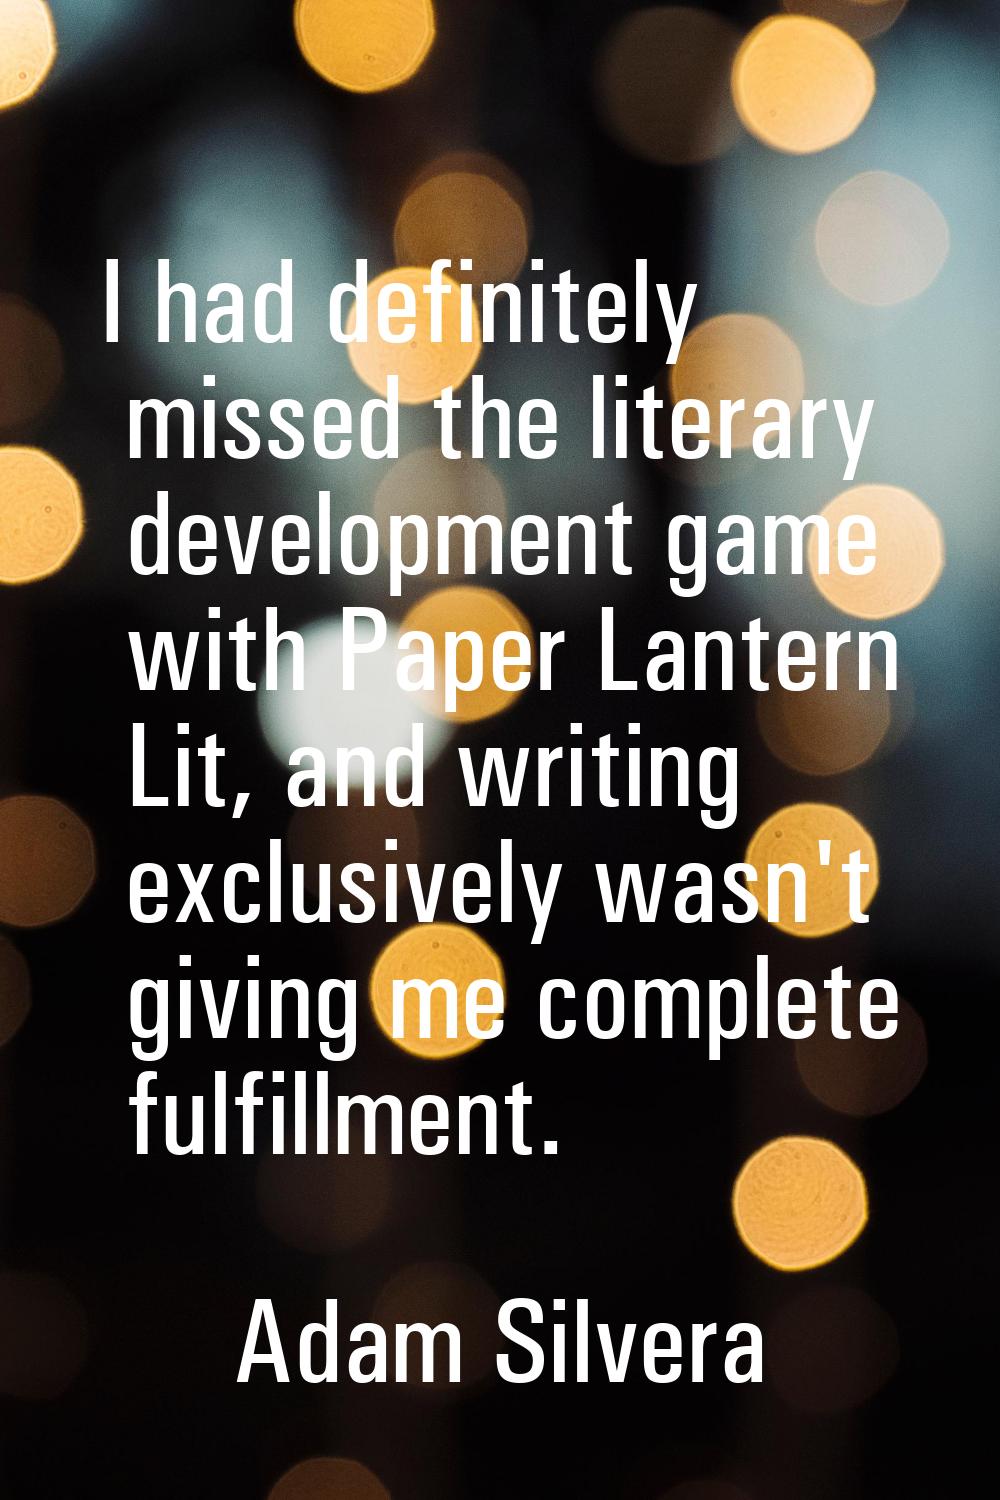 I had definitely missed the literary development game with Paper Lantern Lit, and writing exclusive